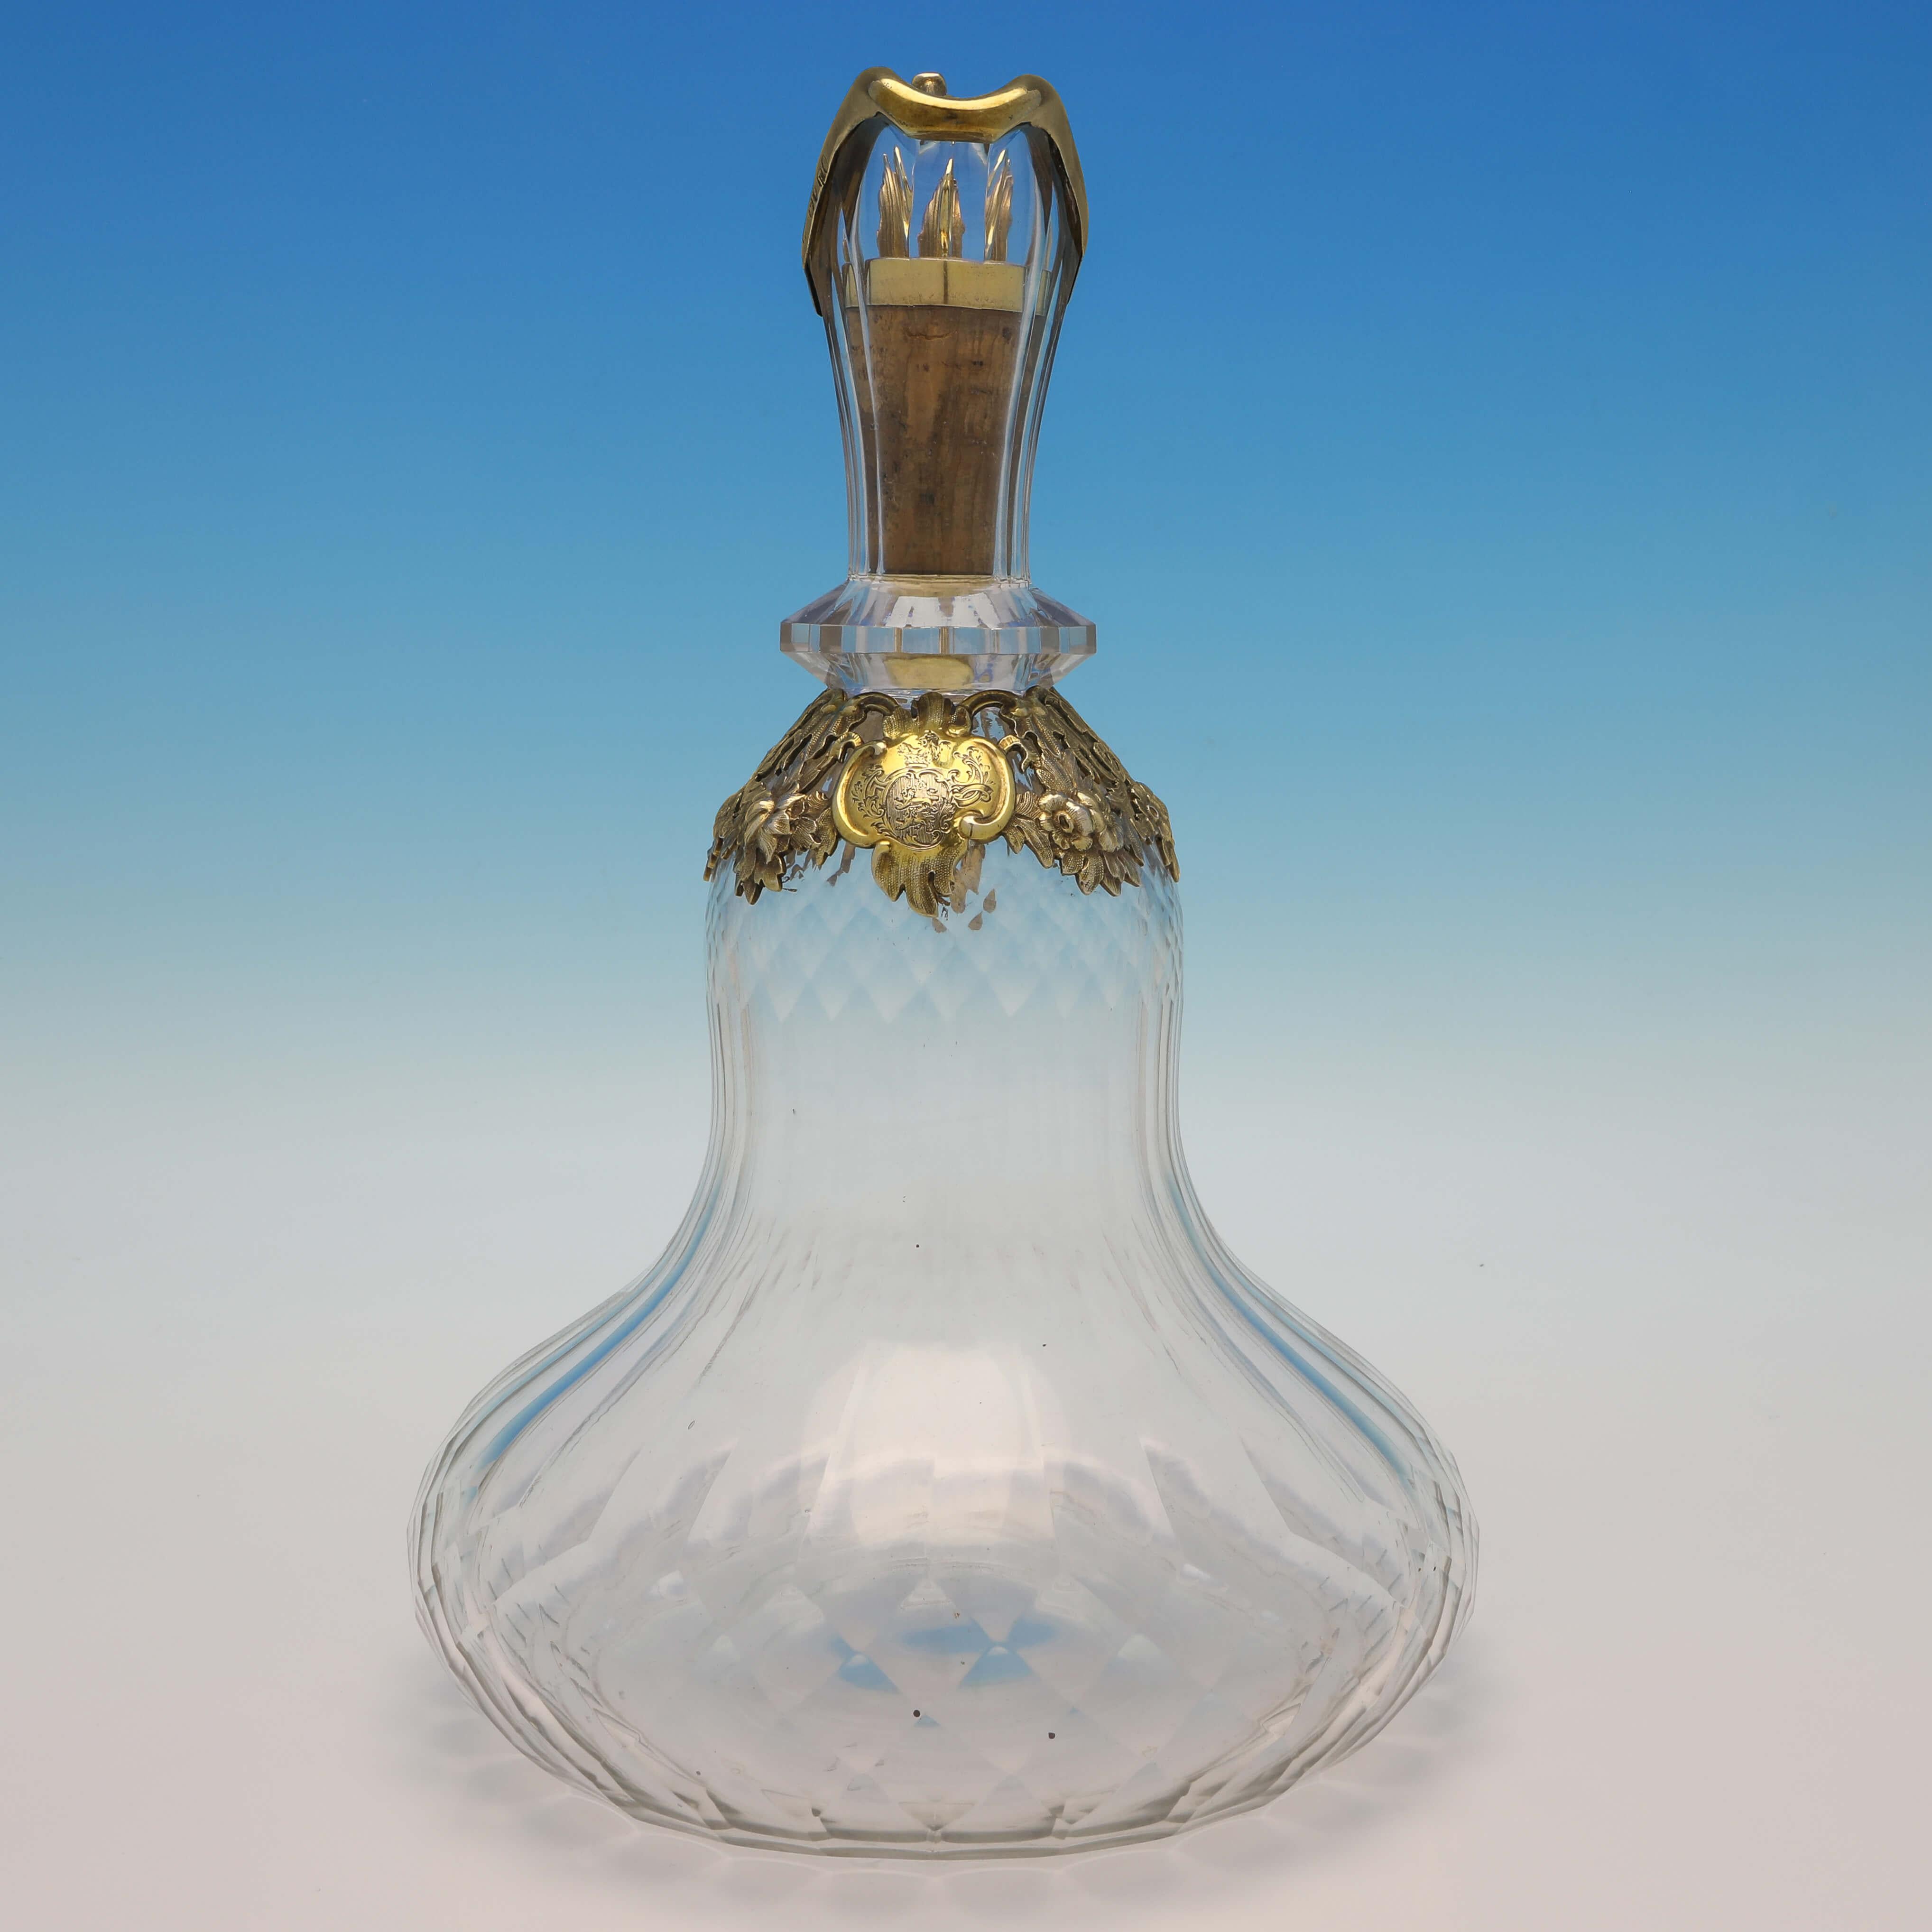 Hallmarked in London in 1854 by Charles & George Fox, this striking, Antique Sterling Silver Claret Jug, features a wide glass body which would add stability, a gilt mount and handle, a cork stopper with gilt silver ring, and an engraved crest and